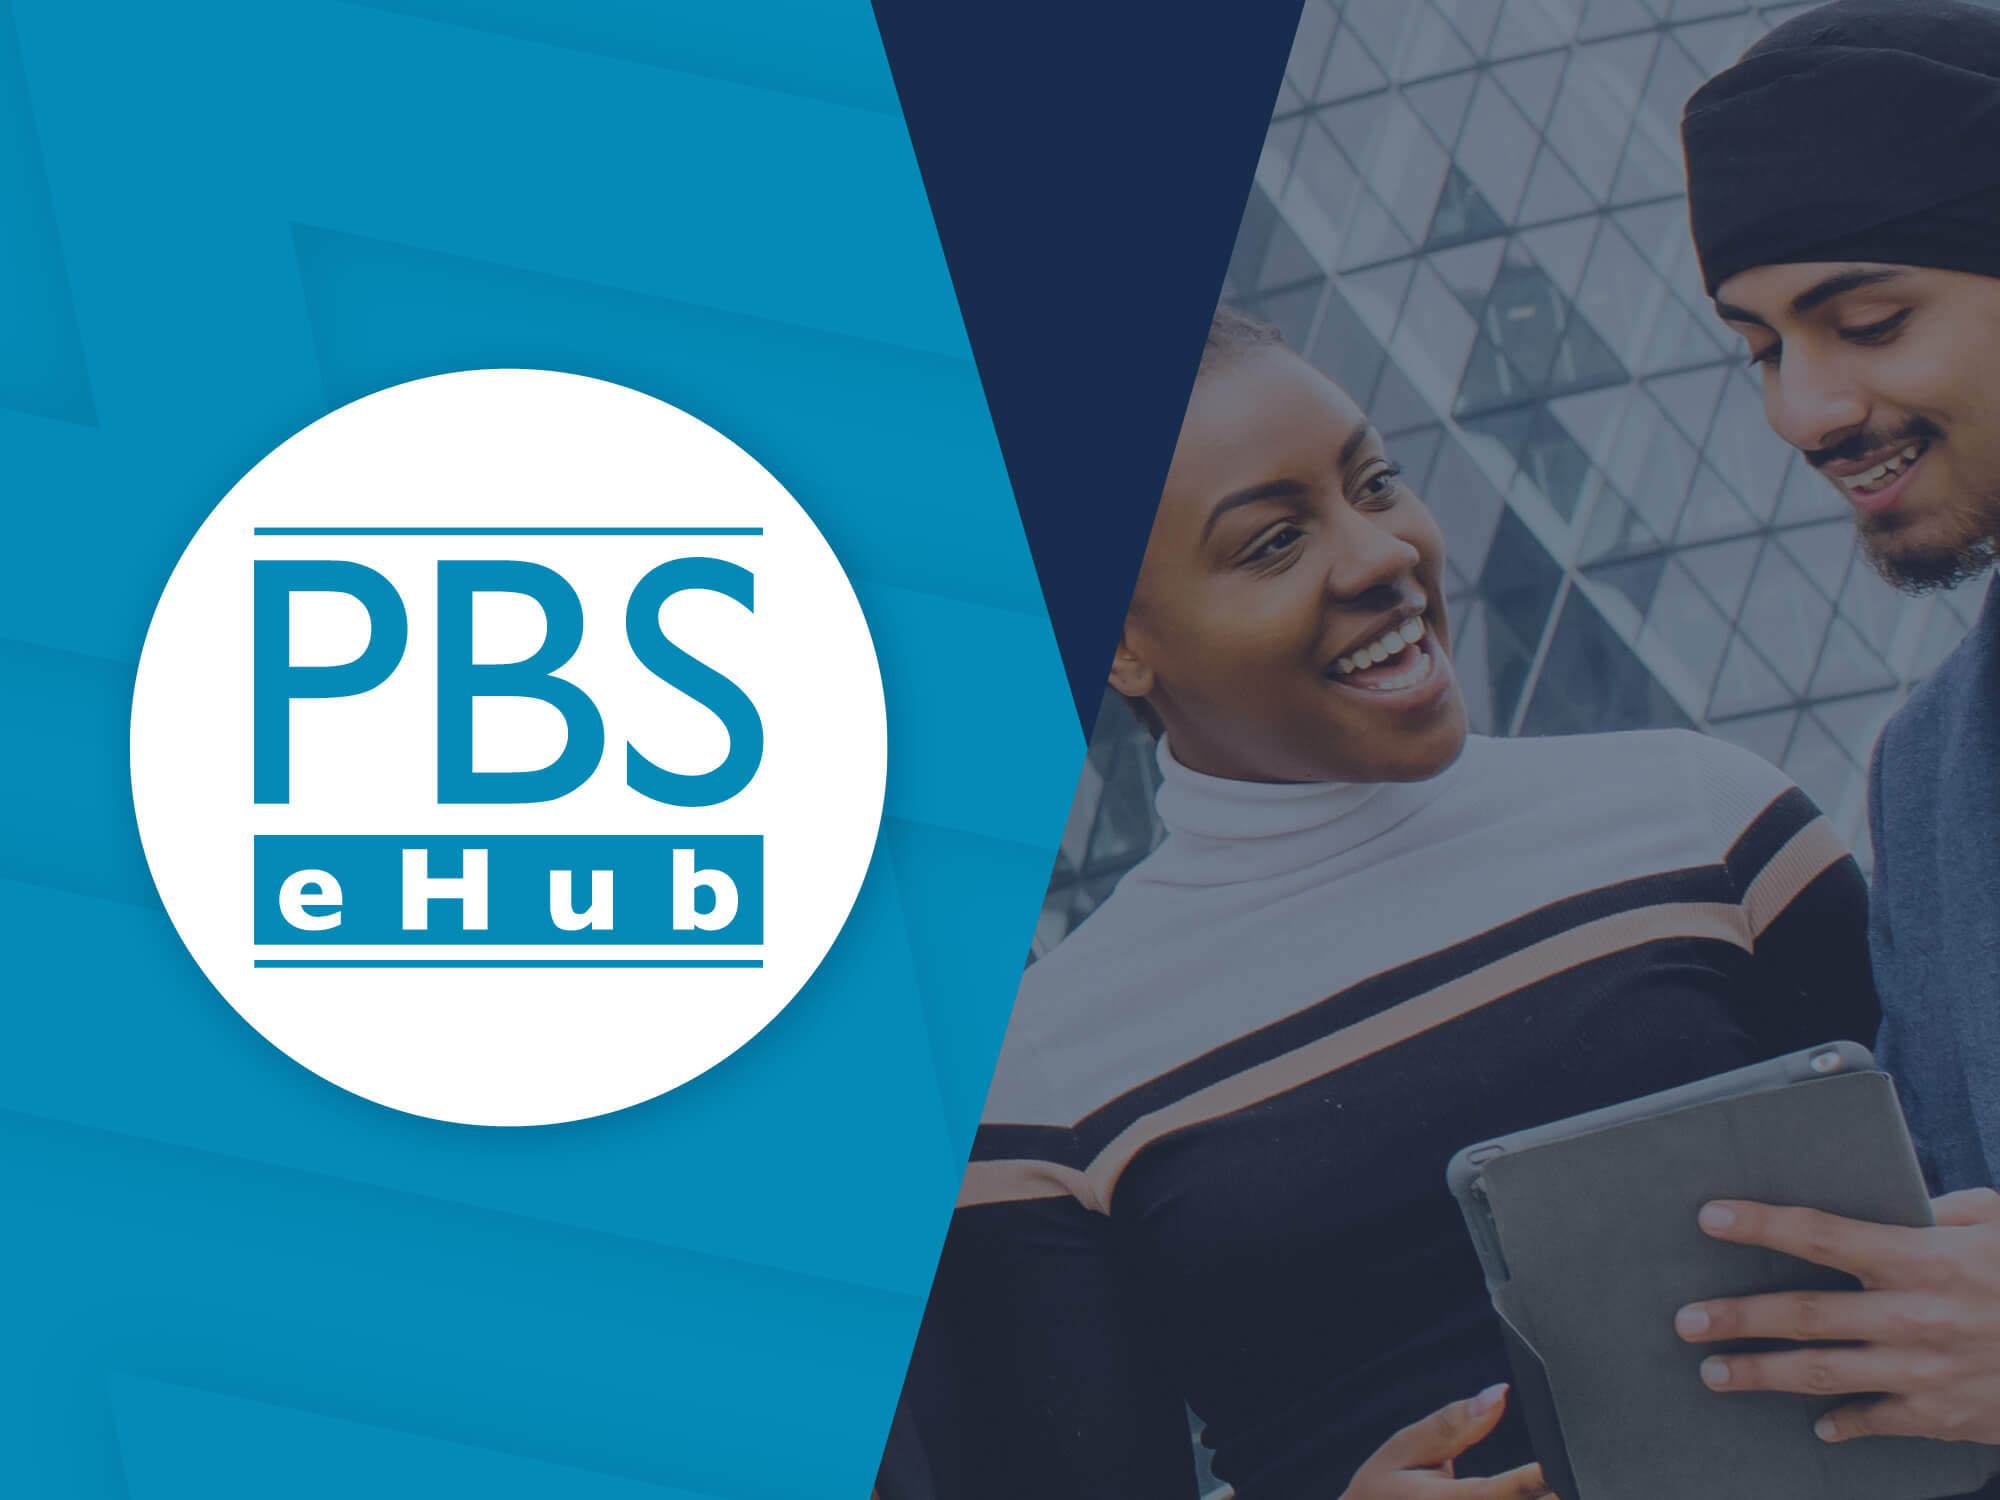 PBS ehub logo with picture of two students looking at a tablet